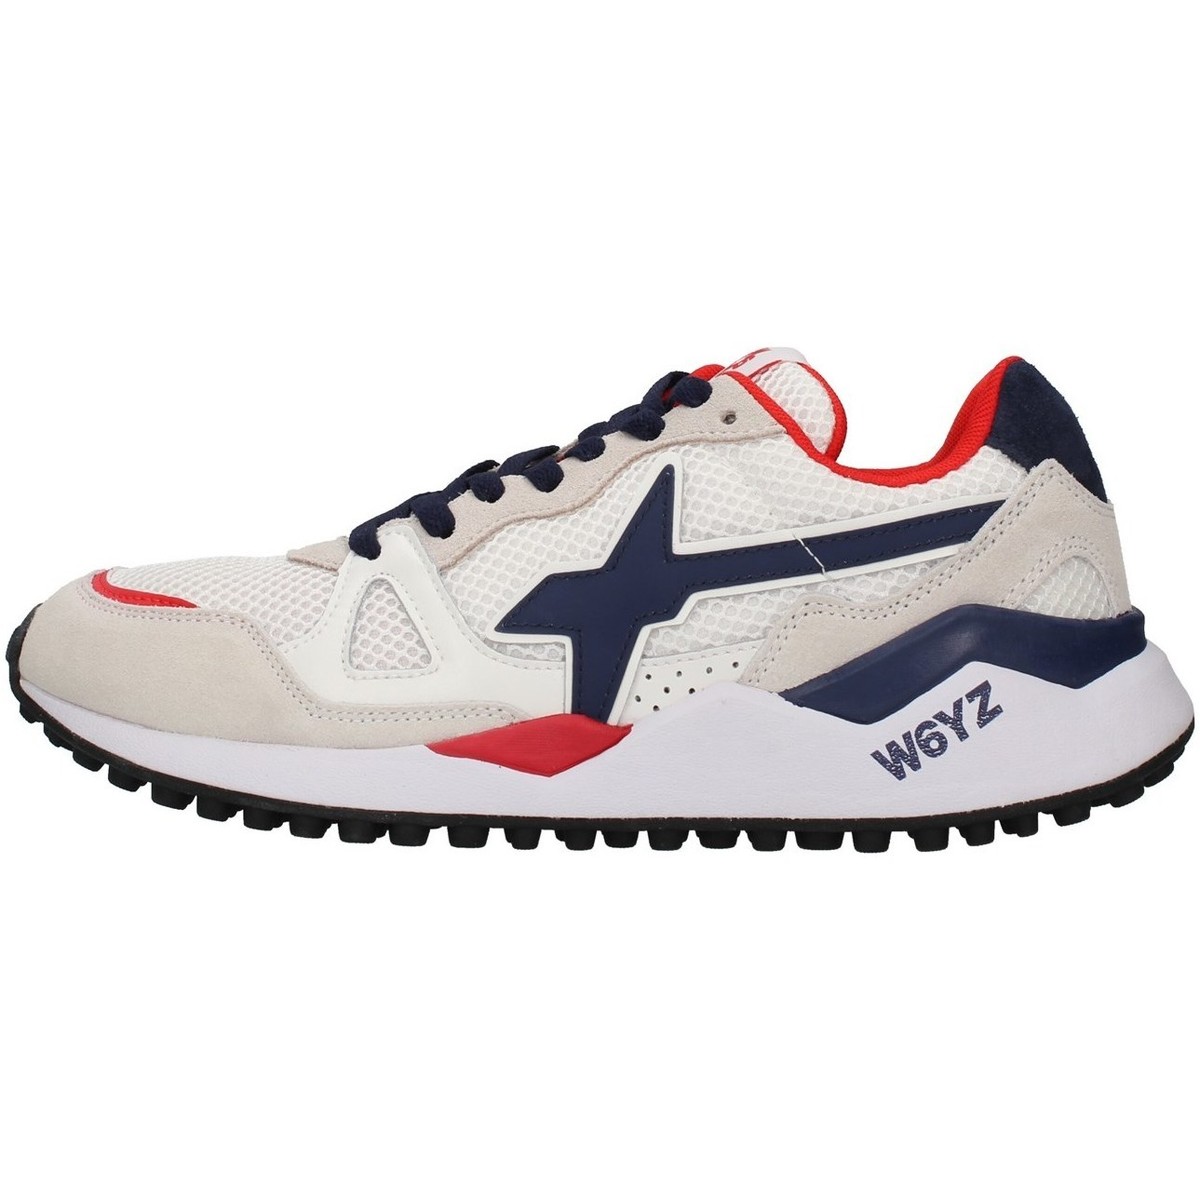 Xαμηλά Sneakers W6Yz – Just Say Wizz 2015183-13-1N07